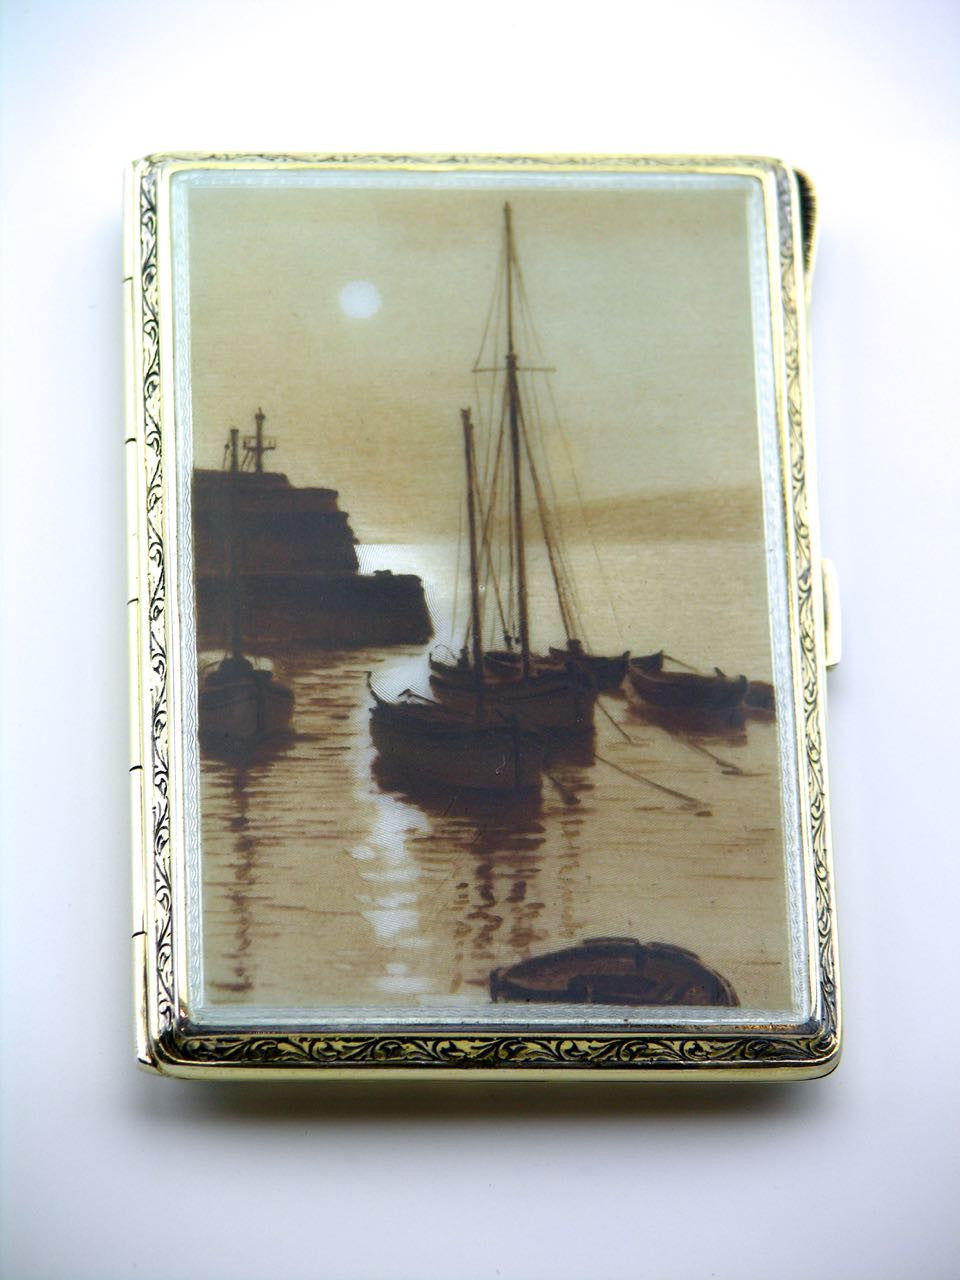 Antique European solid silver and sepia enamel boating scene case